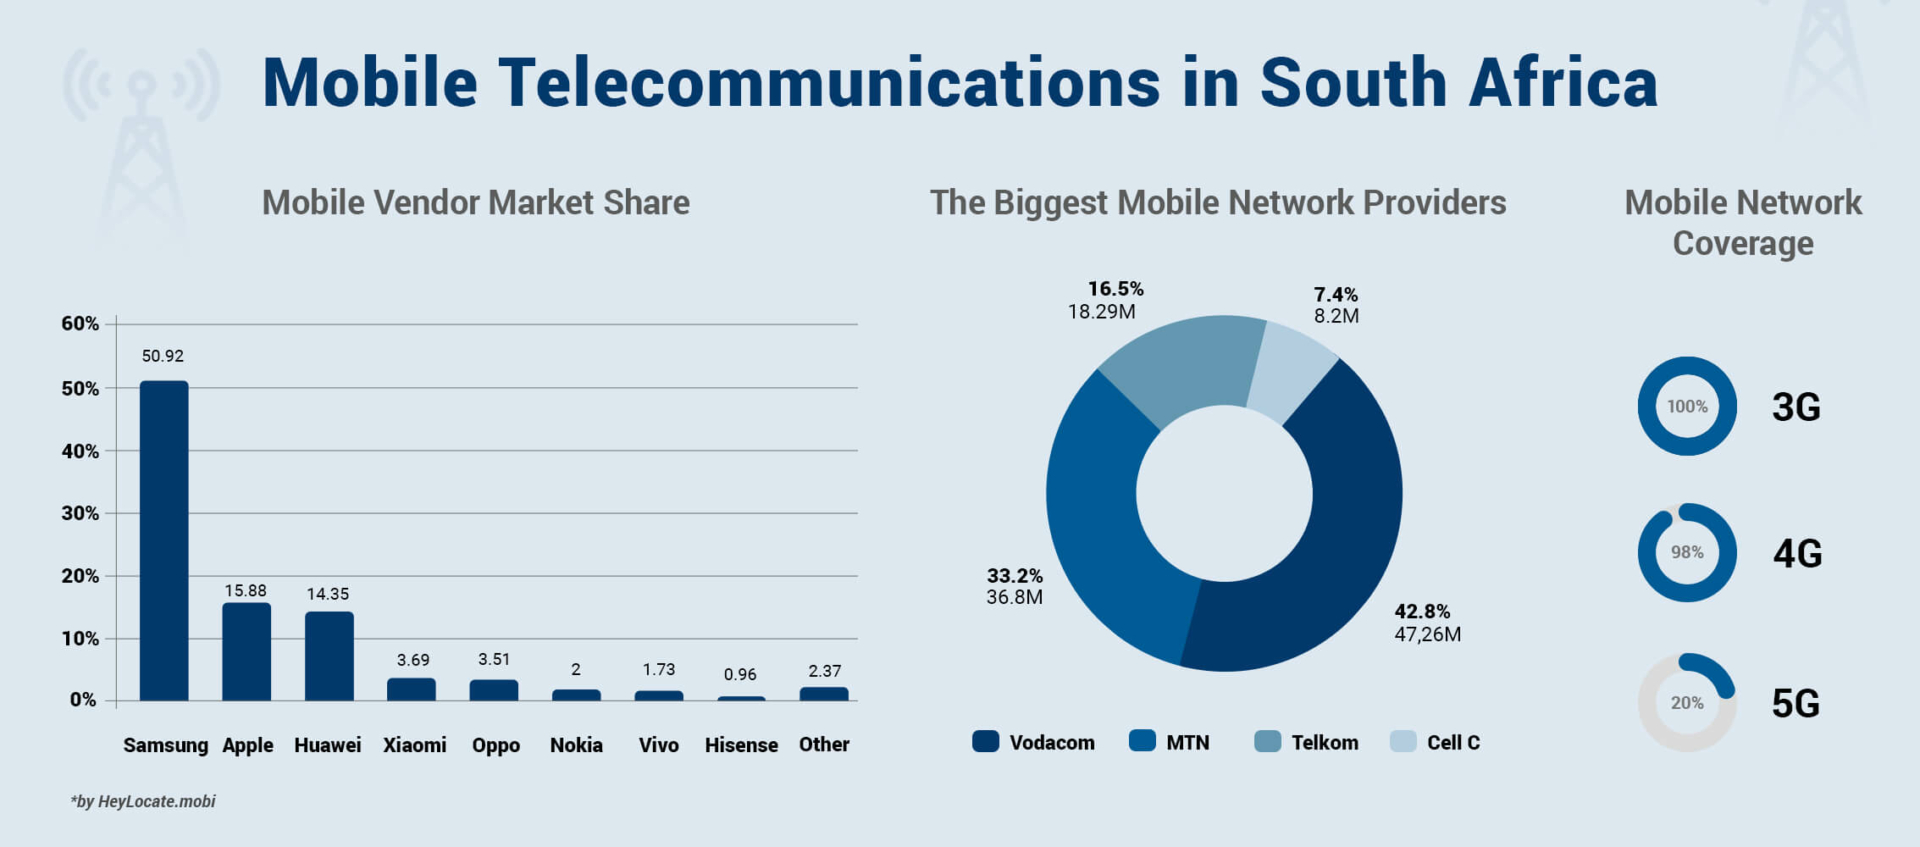 HeyLocate infographic showing mobile telecommunications data in South Africa with the most popular mobile brands and network operators